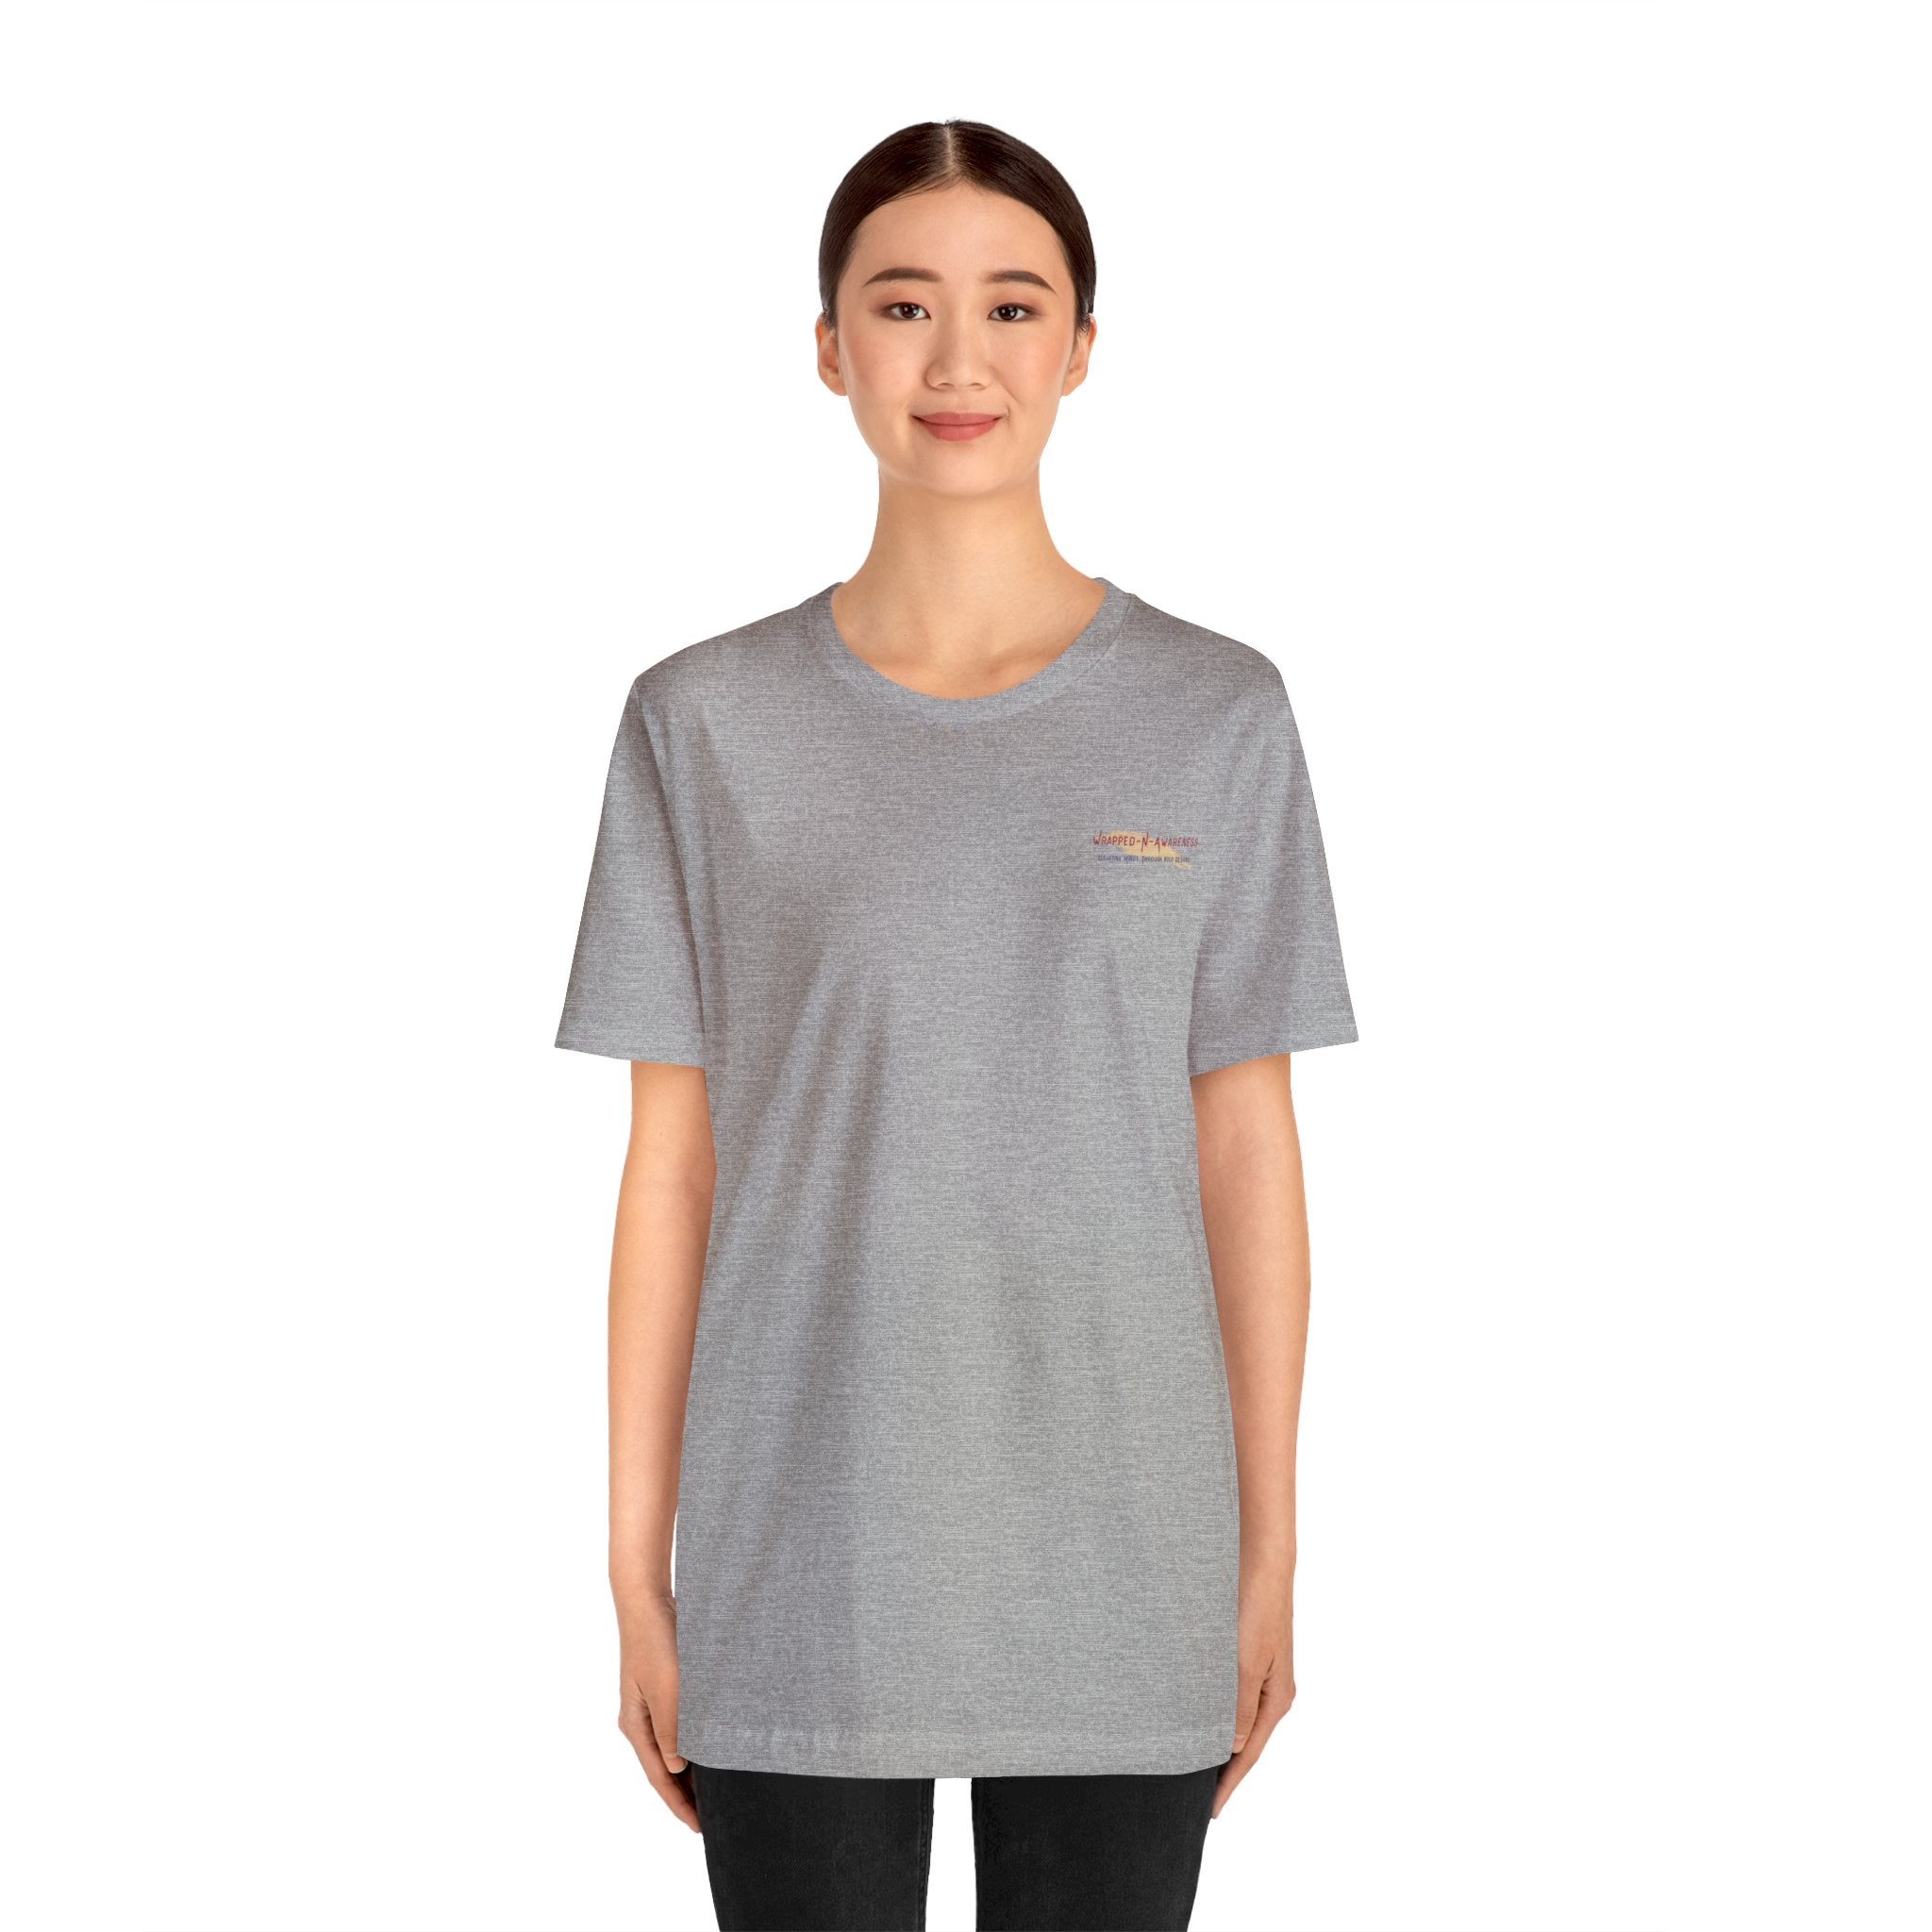 Hope Conquers Fear Jersey Tee - Bella+Canvas 3001 Heather Ice Blue Airlume Cotton Bella+Canvas 3001 Crew Neckline Jersey Short Sleeve Lightweight Fabric Mental Health Support Retail Fit Tear-away Label Tee Unisex Tee T-Shirt 9829378996921141754_2048 Printify